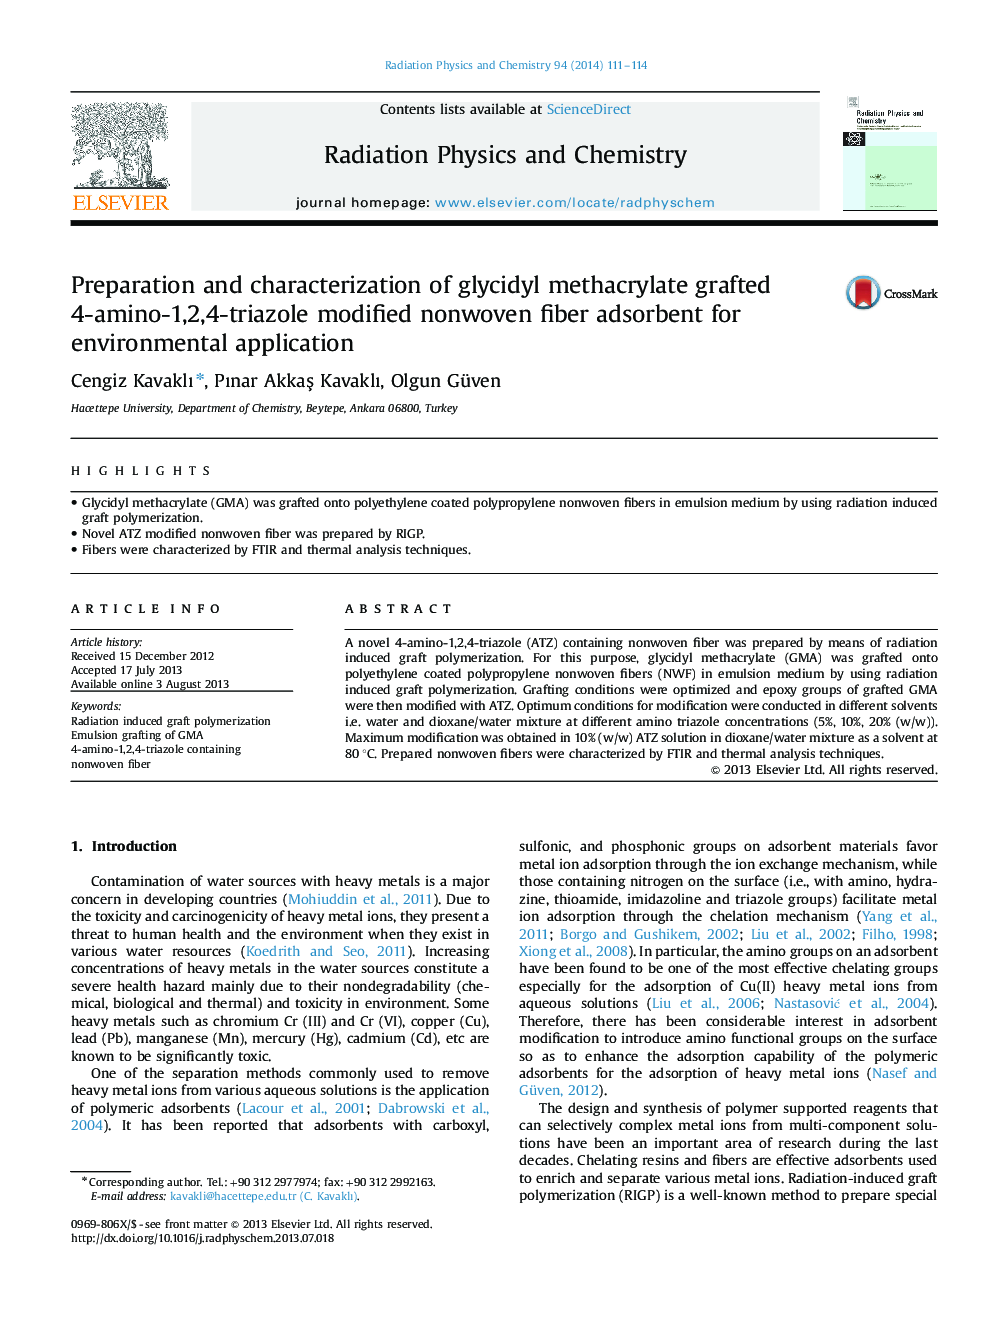 Preparation and characterization of glycidyl methacrylate grafted 4-amino-1,2,4-triazole modified nonwoven fiber adsorbent for environmental application